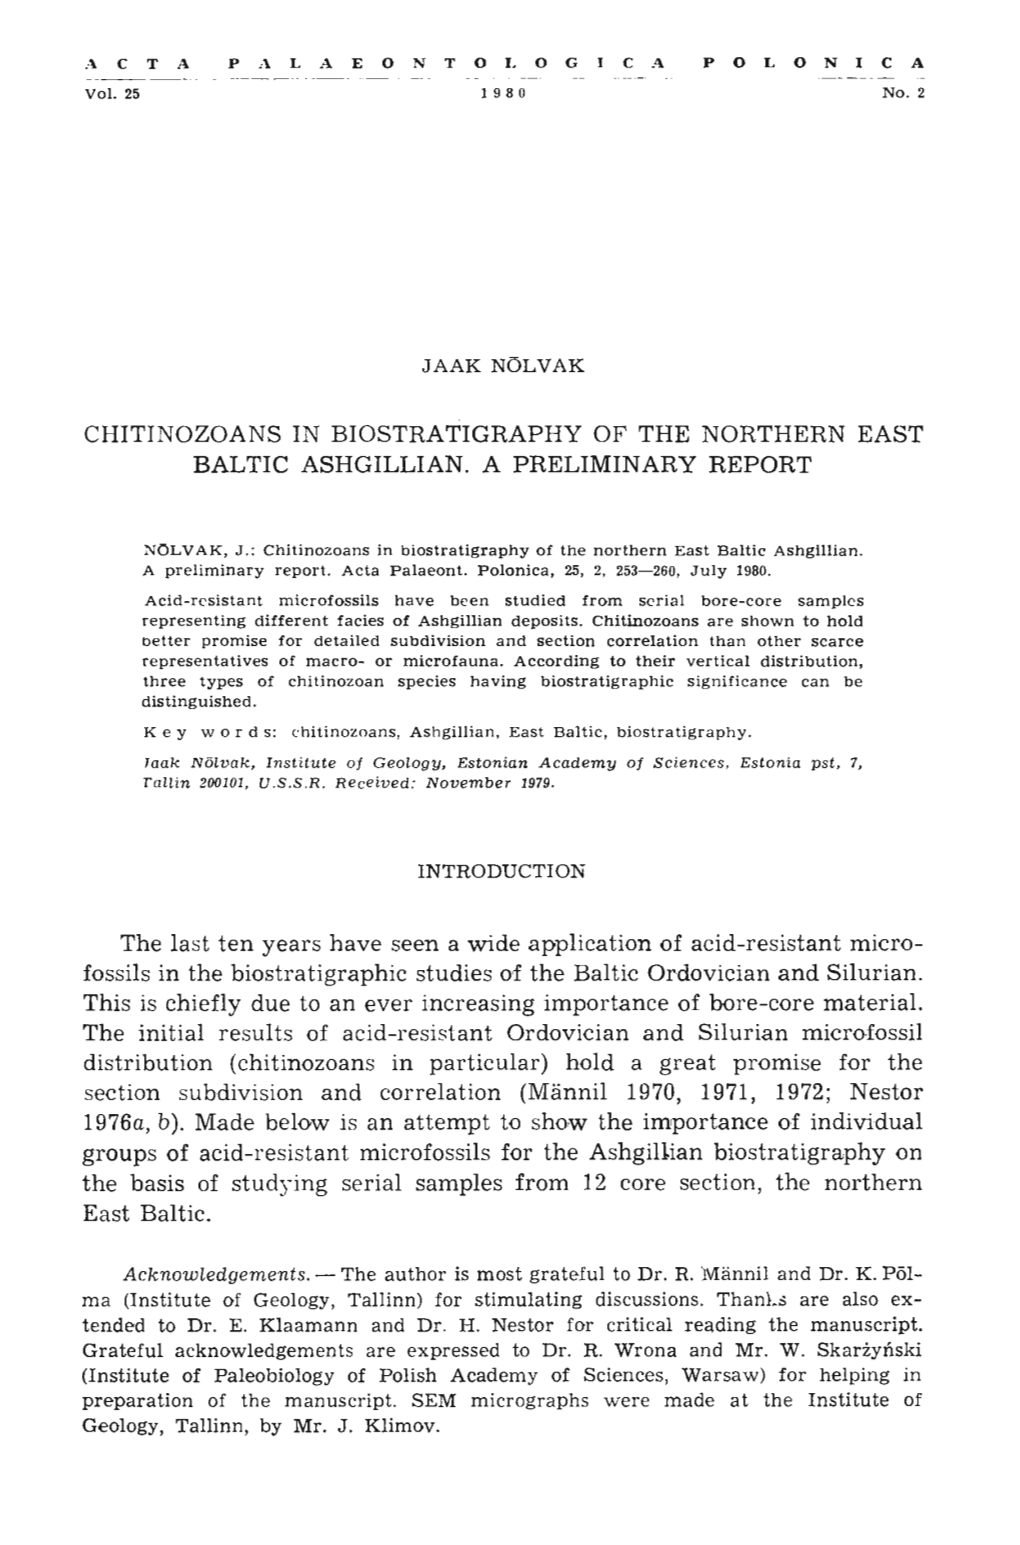 Chitinozoans in Biostratigraphy of the Northern East Baltic Ashgillian